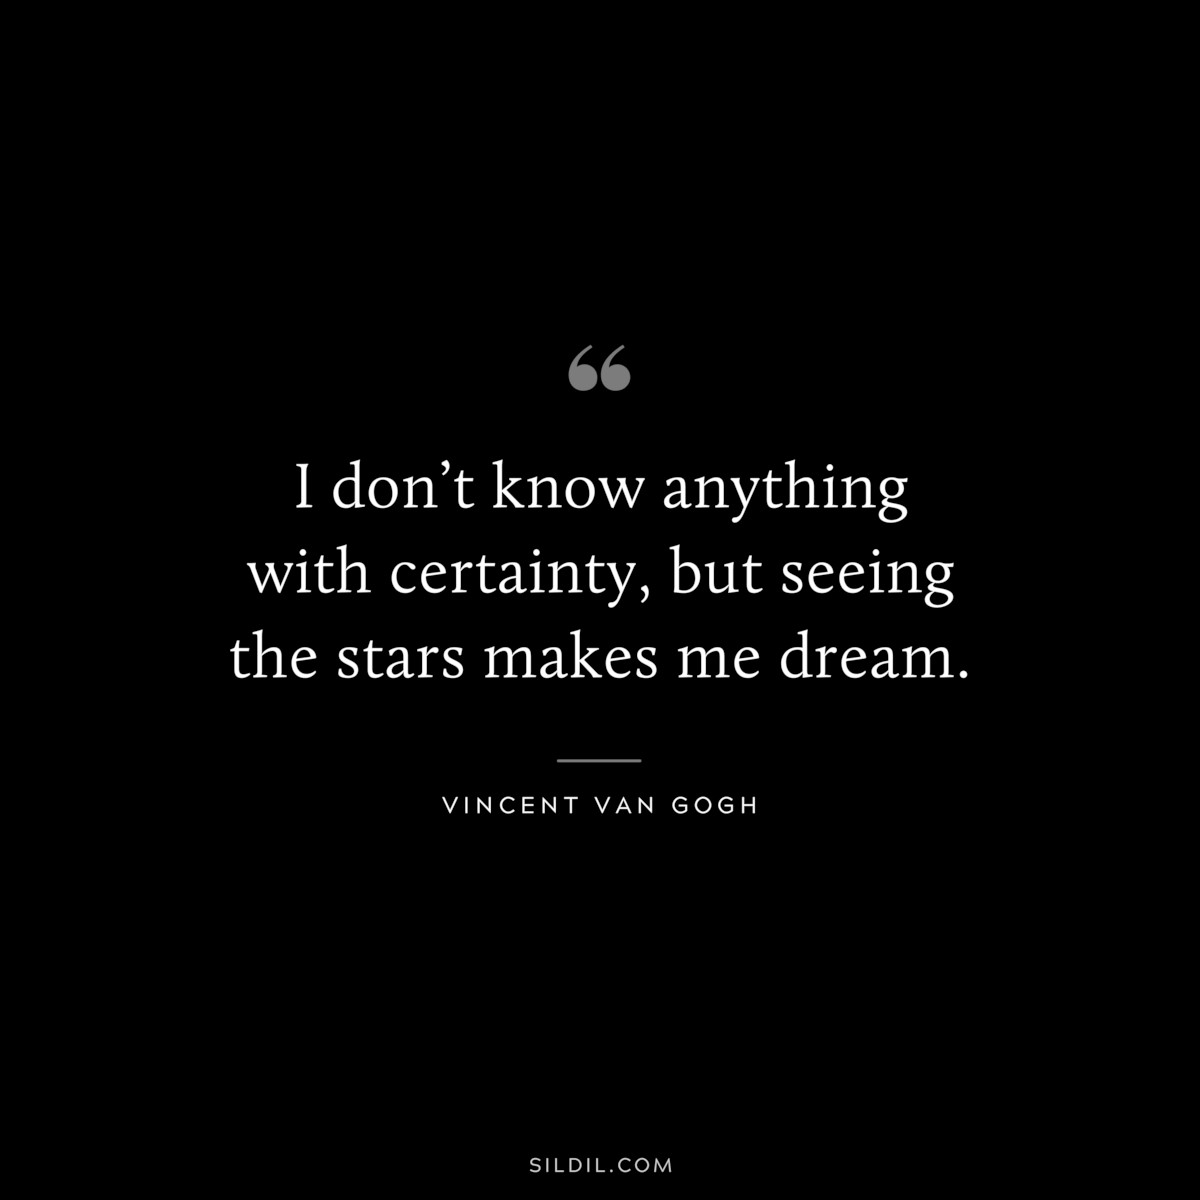 I don’t know anything with certainty, but seeing the stars makes me dream. ― Vincent van Gogh